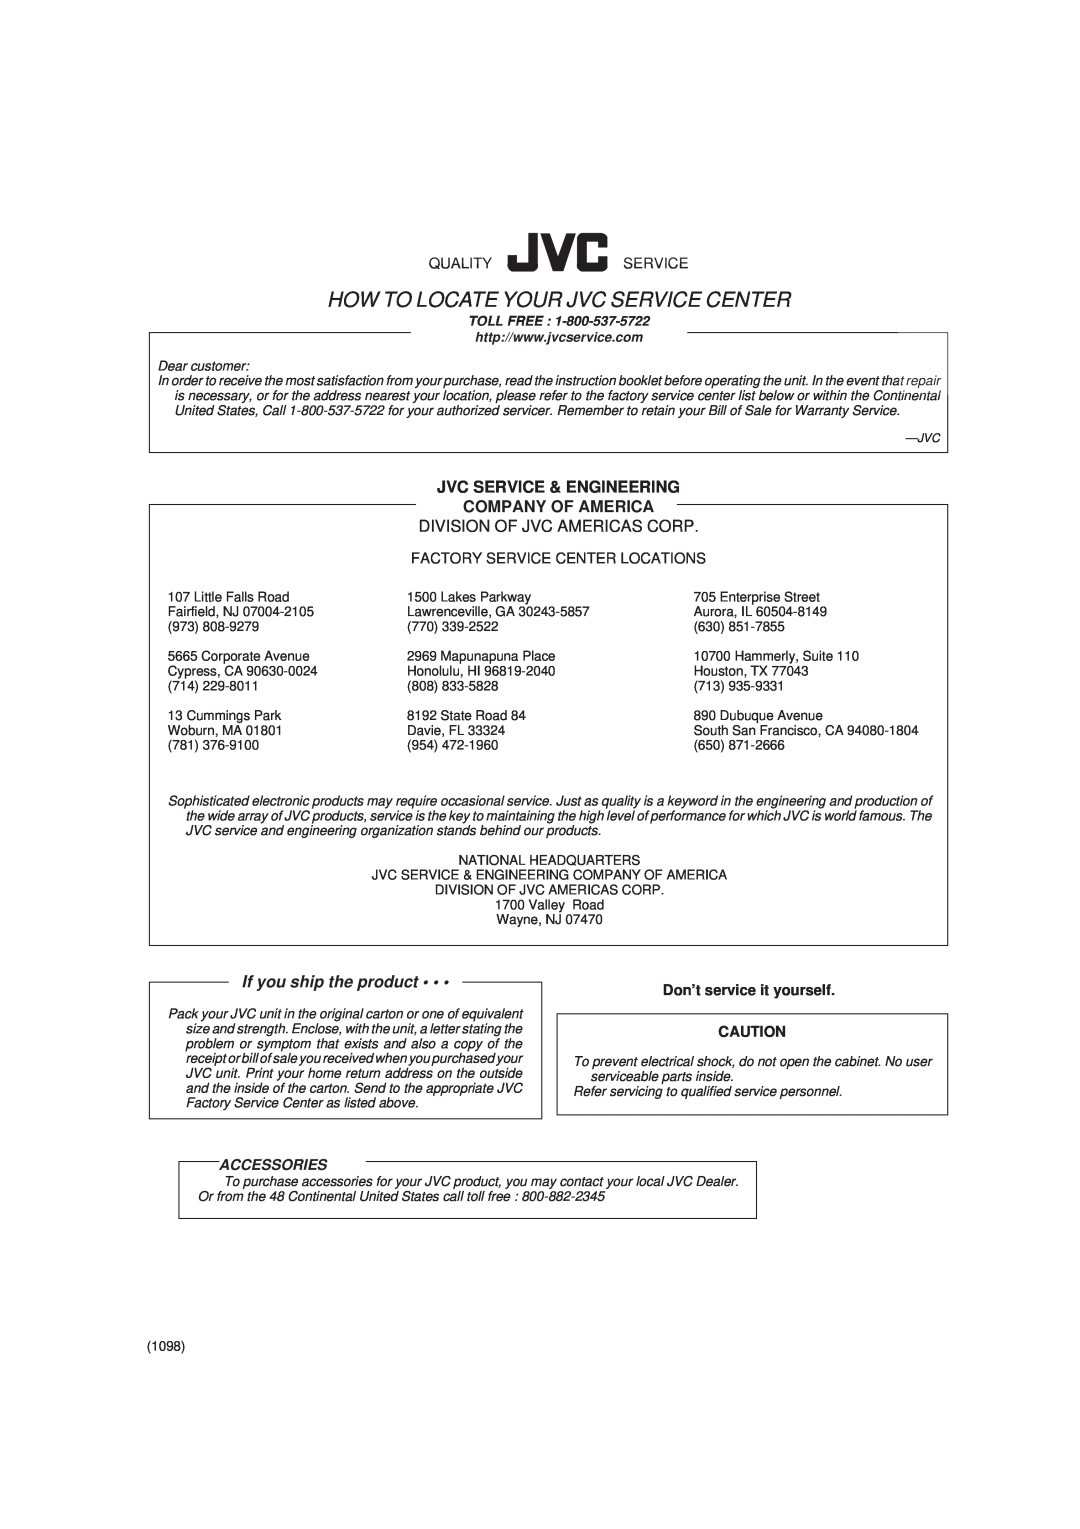 JVC MX-J300 manual Jvc Service & Engineering Company Of America, Division Of Jvc Americas Corp, Qualityservice, Accessories 